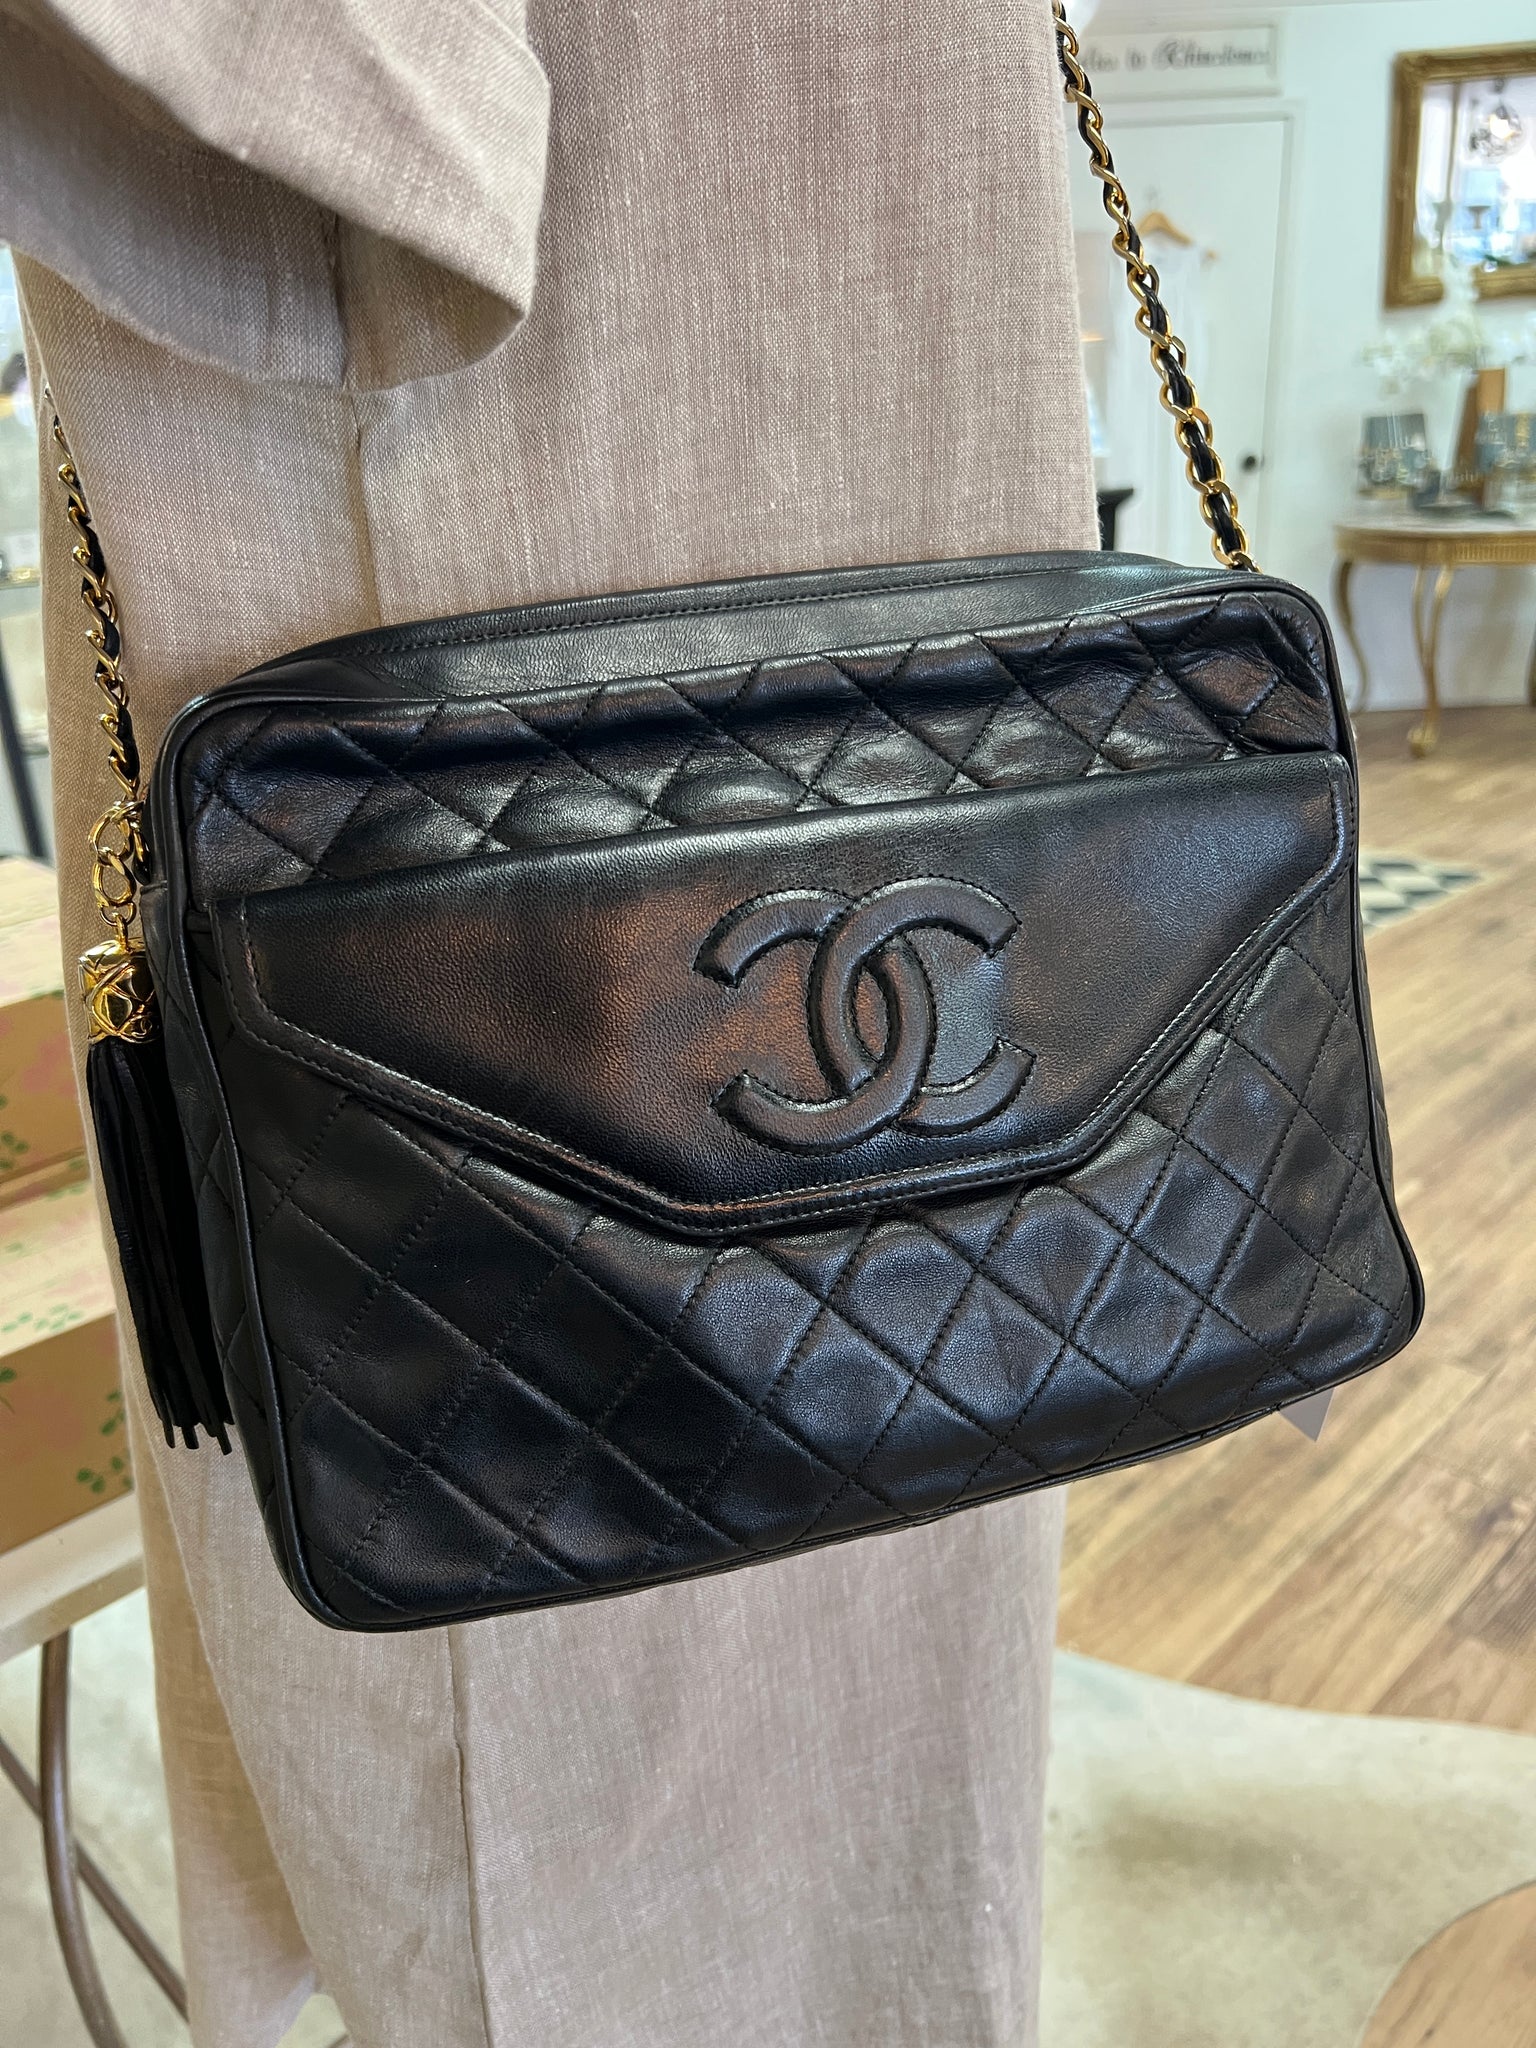 Chanel Black Quilted Lambskin Camera Bag Gold Chain 1014c7